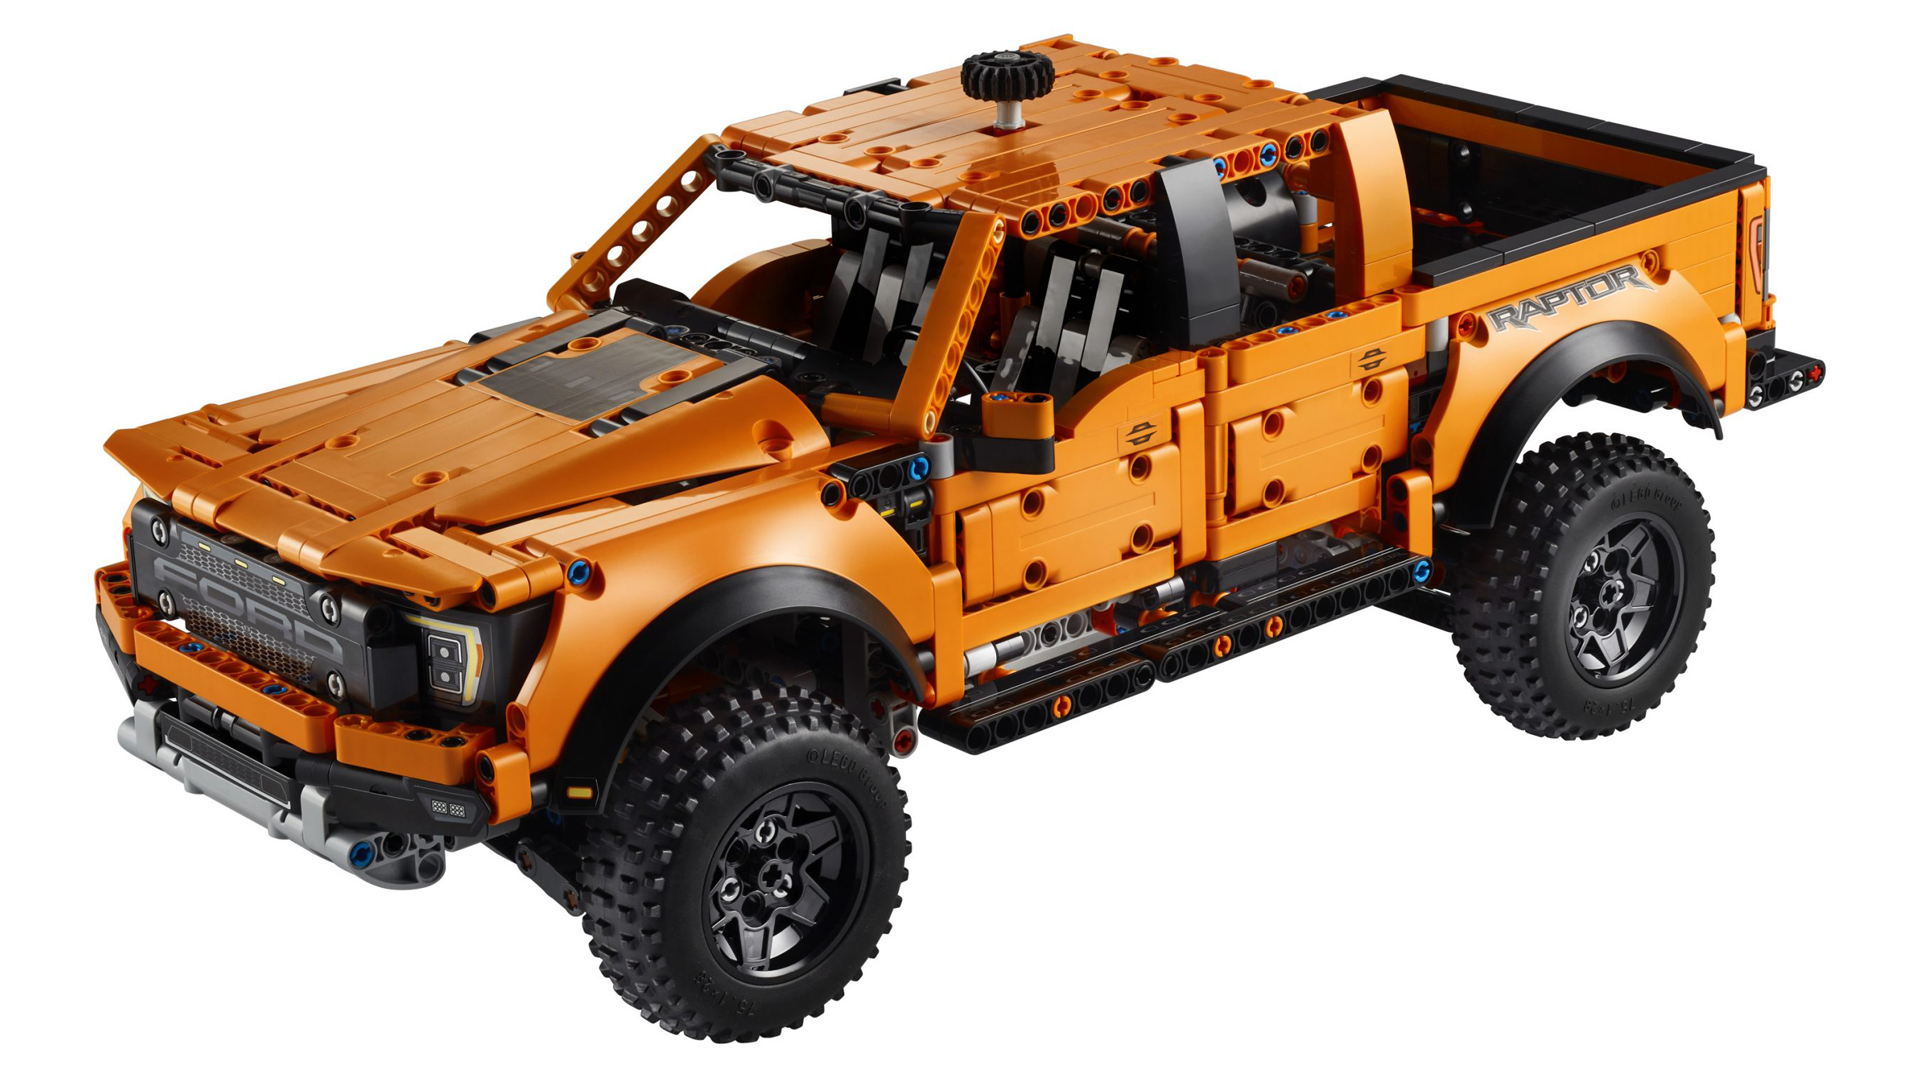 Truck Yeah: LEGO Announces Recent Technic Raptor and a Traditional Pickup Truck